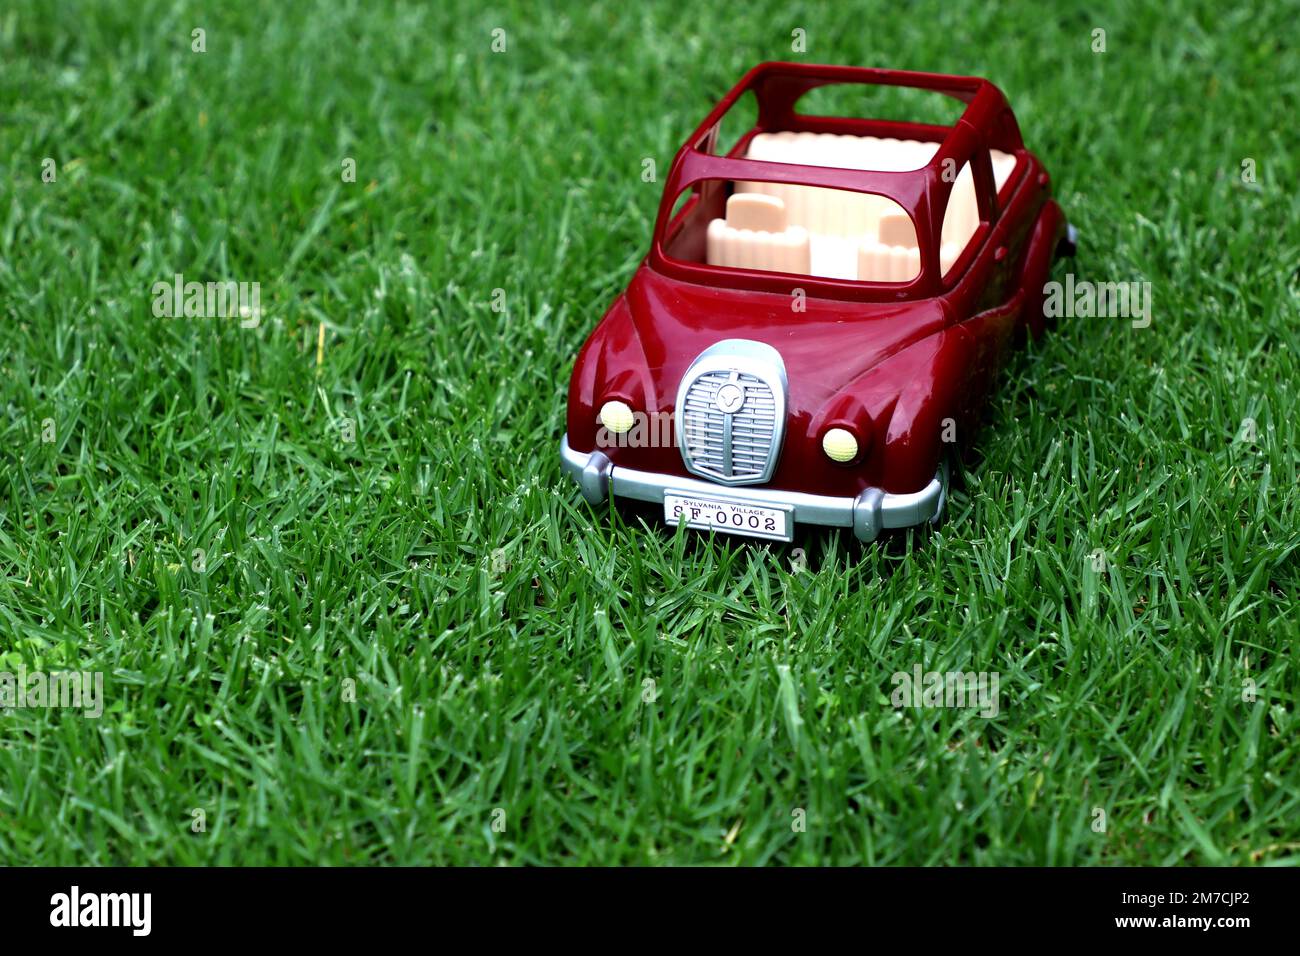 A classic burgundy plastic toy car with the roof down, a silver bumper and fender and white seats sitting on grass Stock Photo